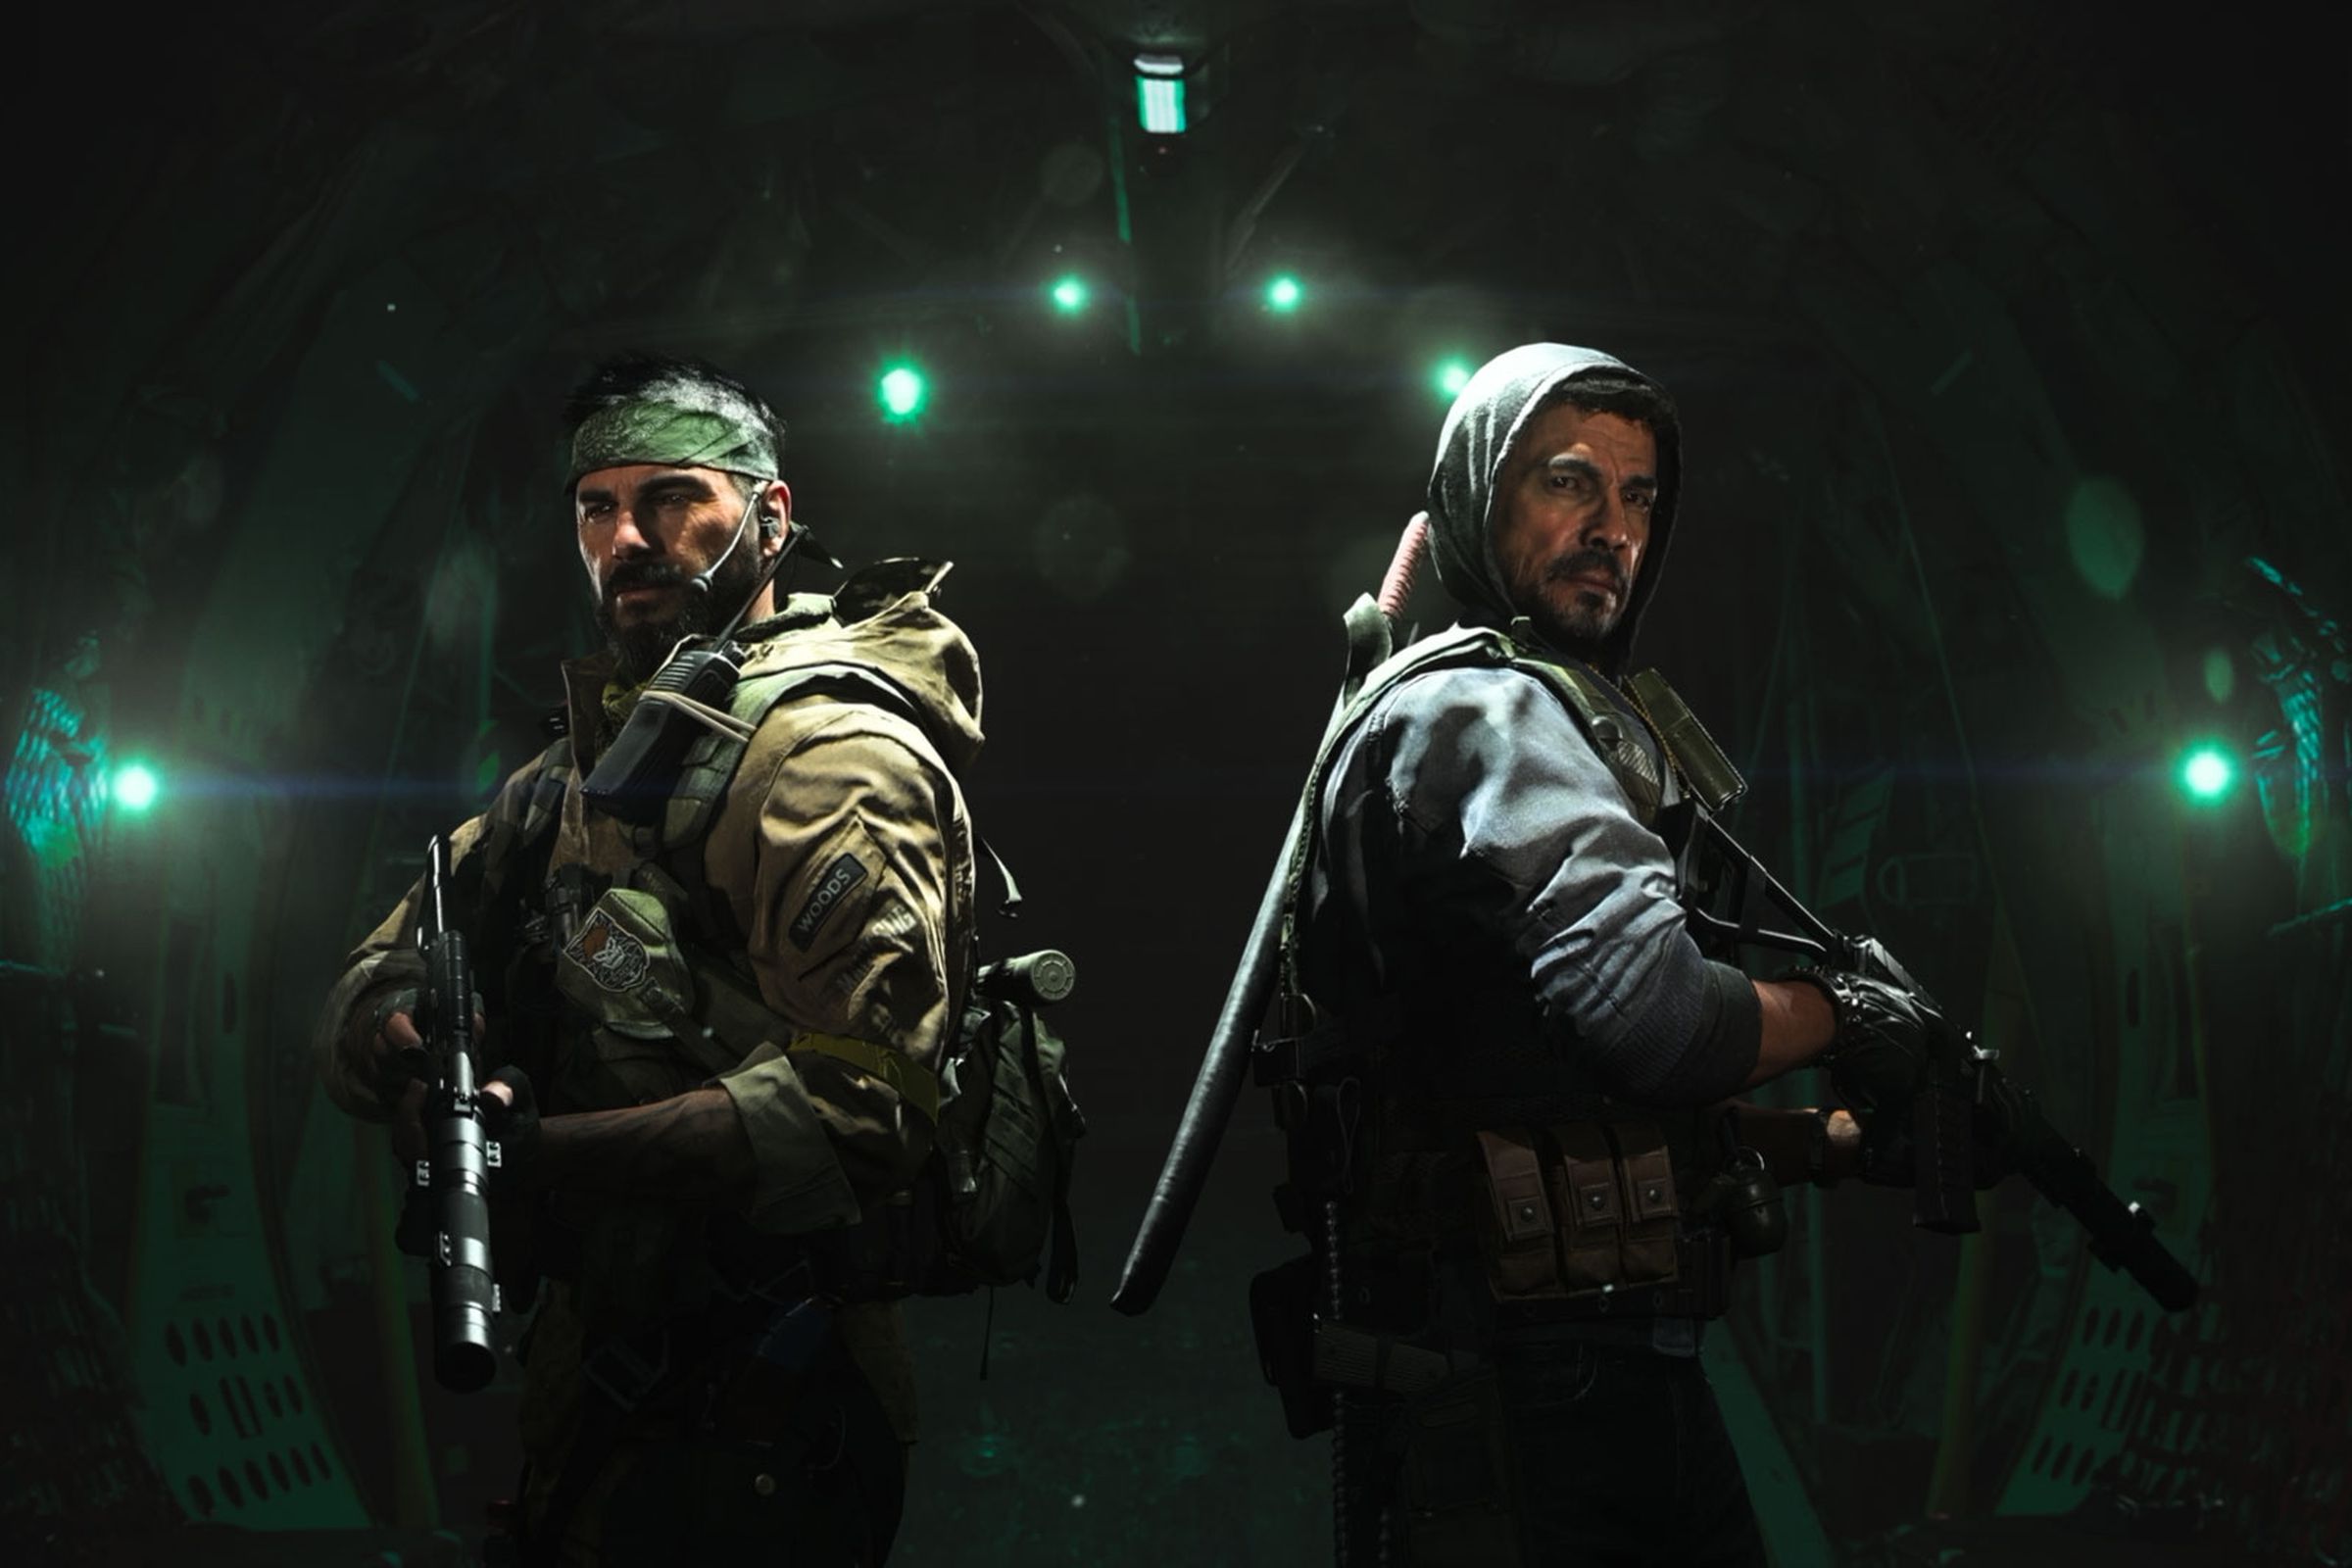 New operators from Call of Duty: Black Ops Cold War will be available in Warzone.